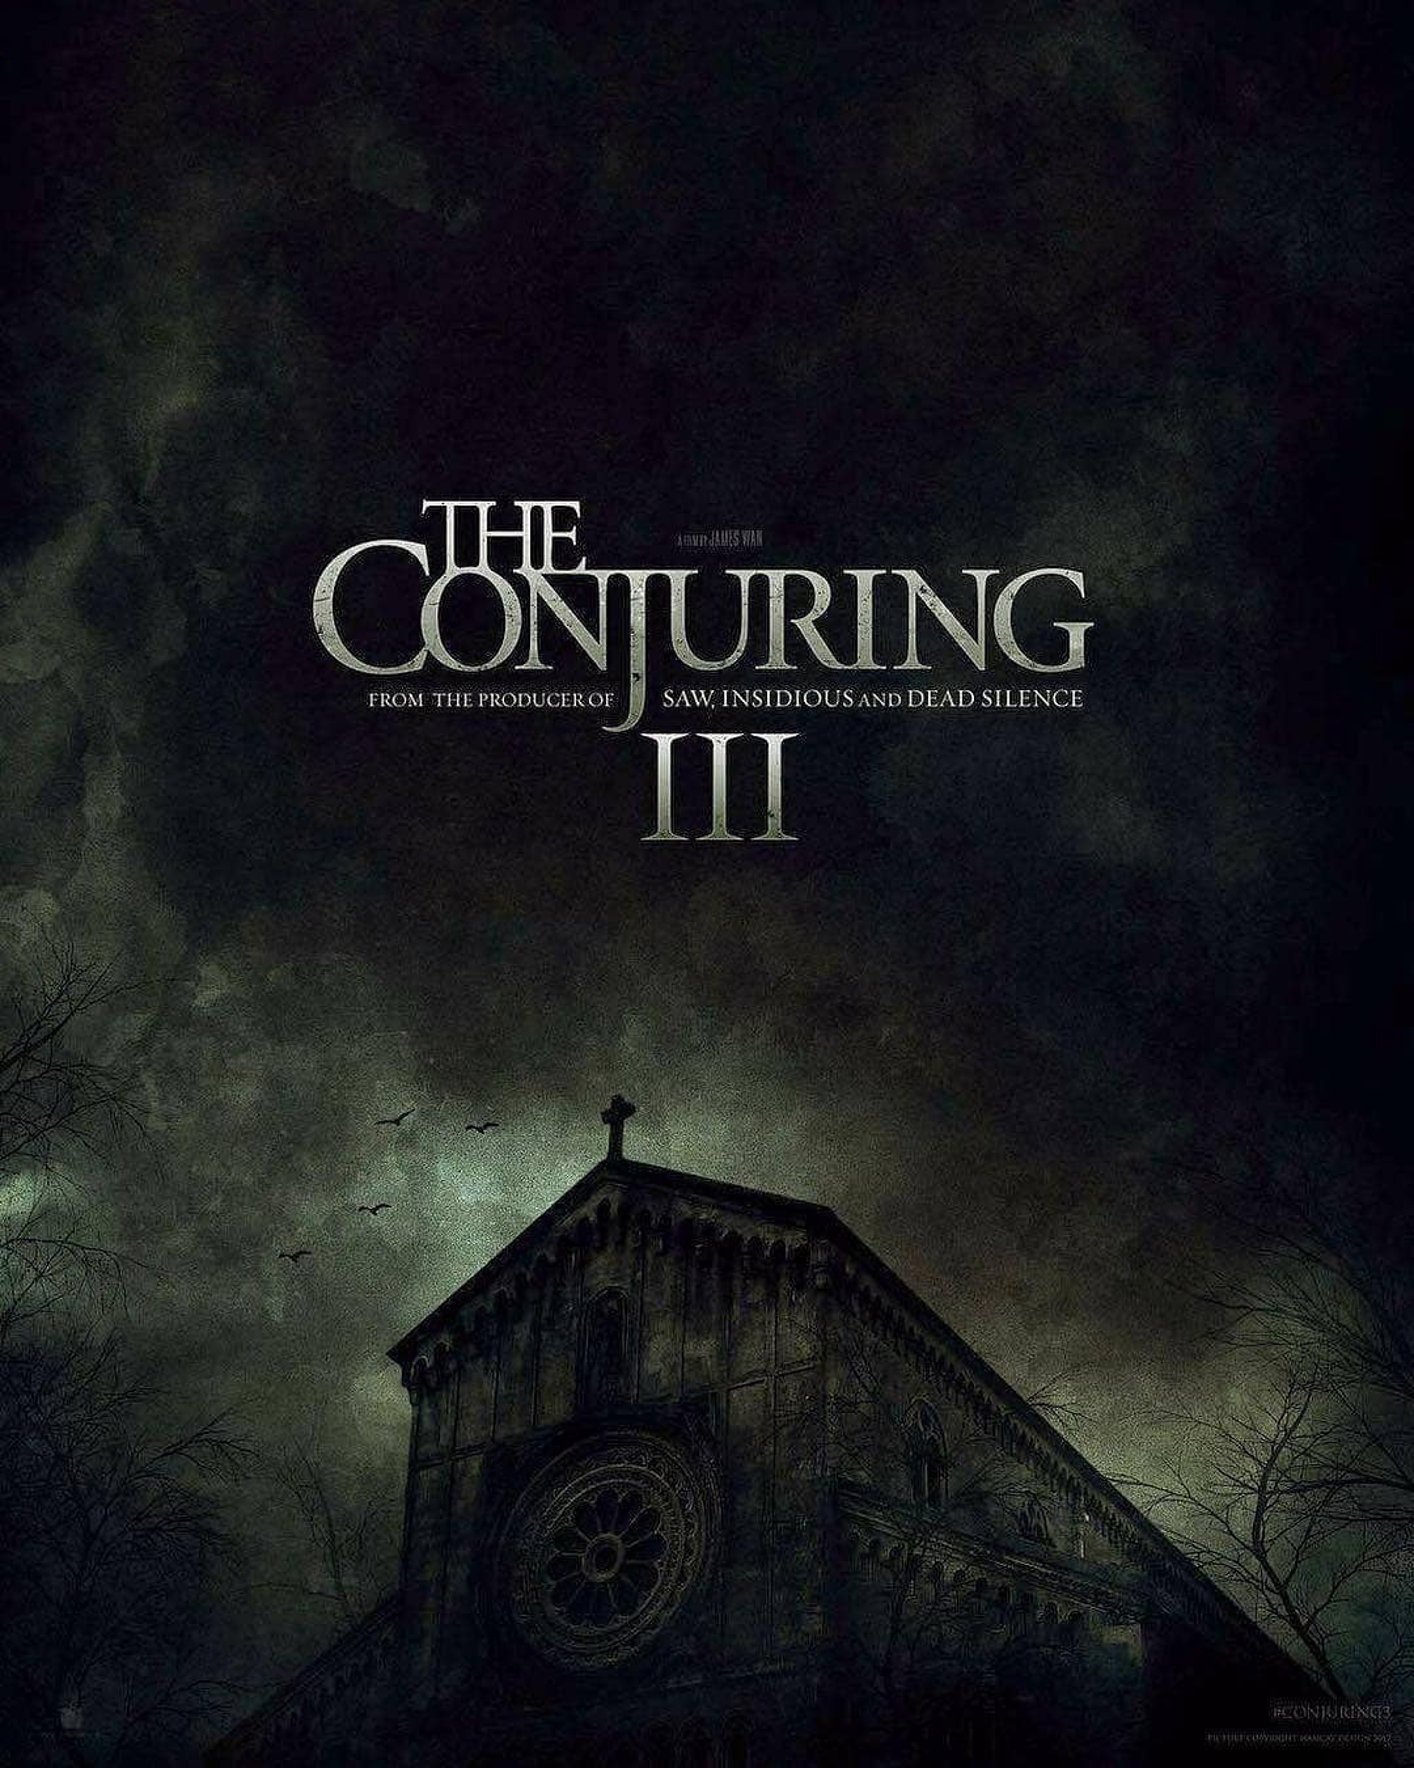 The Conjuring 3 Casting for Paramedic and Police Officer Roles